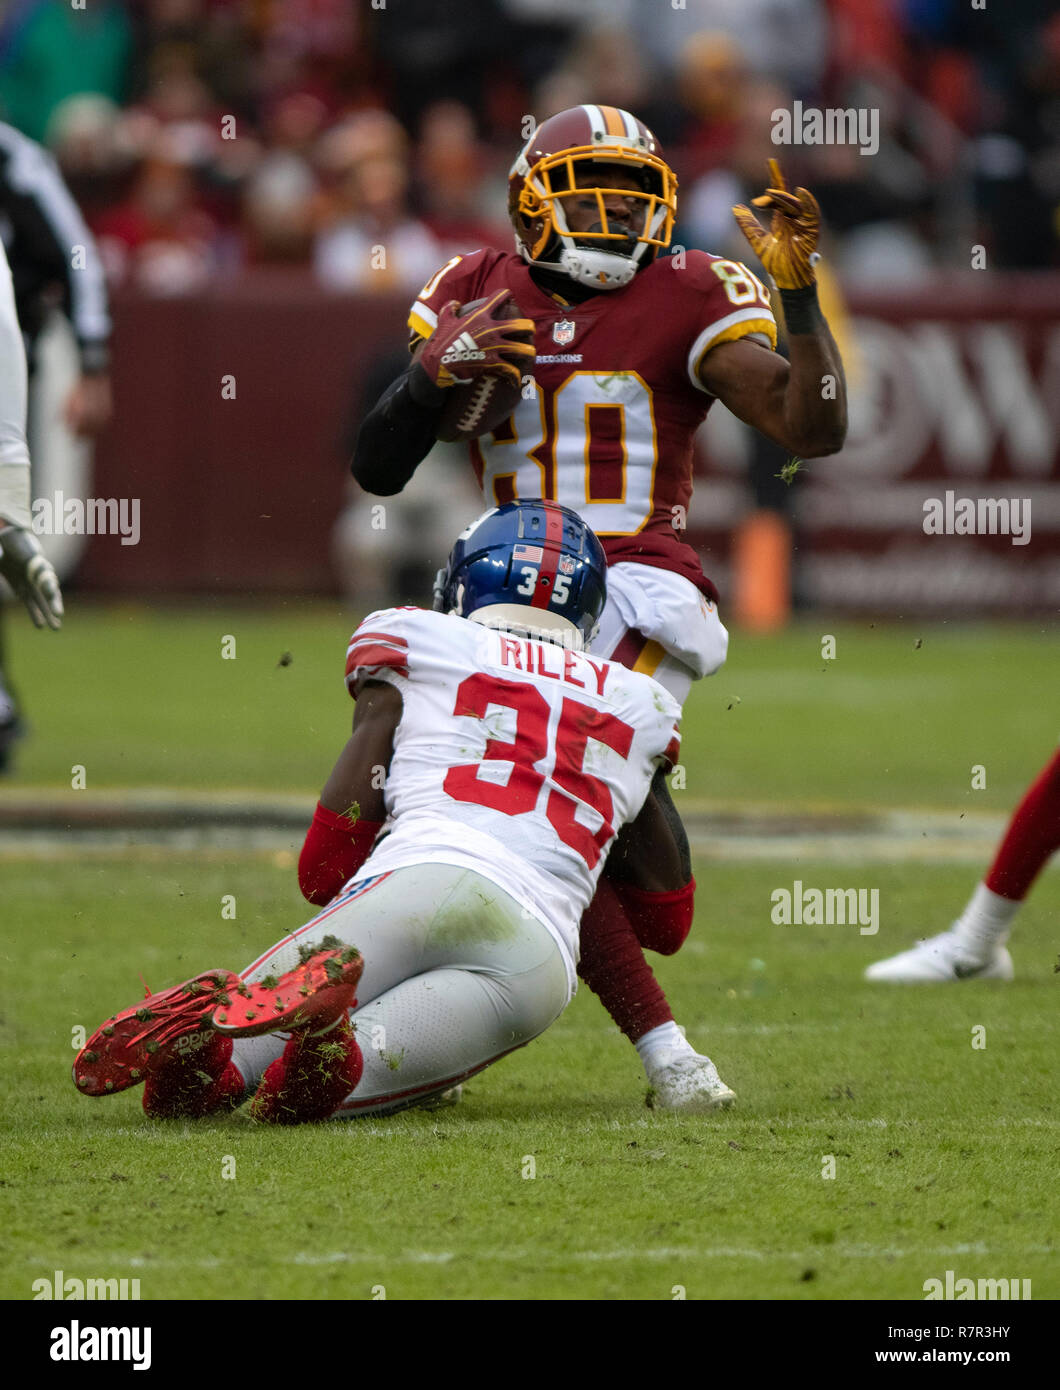 New York Giants free safety Curtis Riley (35) tackles against the Washington RedskinsWashington Redskins wide receiver Jamison Crowder (80) in second quarter action Landover, Maryland on Sunday, December 9, 2018. Credit: Ron Sachs/CNP (RESTRICTION: NO New York or New Jersey Newspapers or newspapers within a 75 mile radius of New York City) | usage worldwide Stock Photo